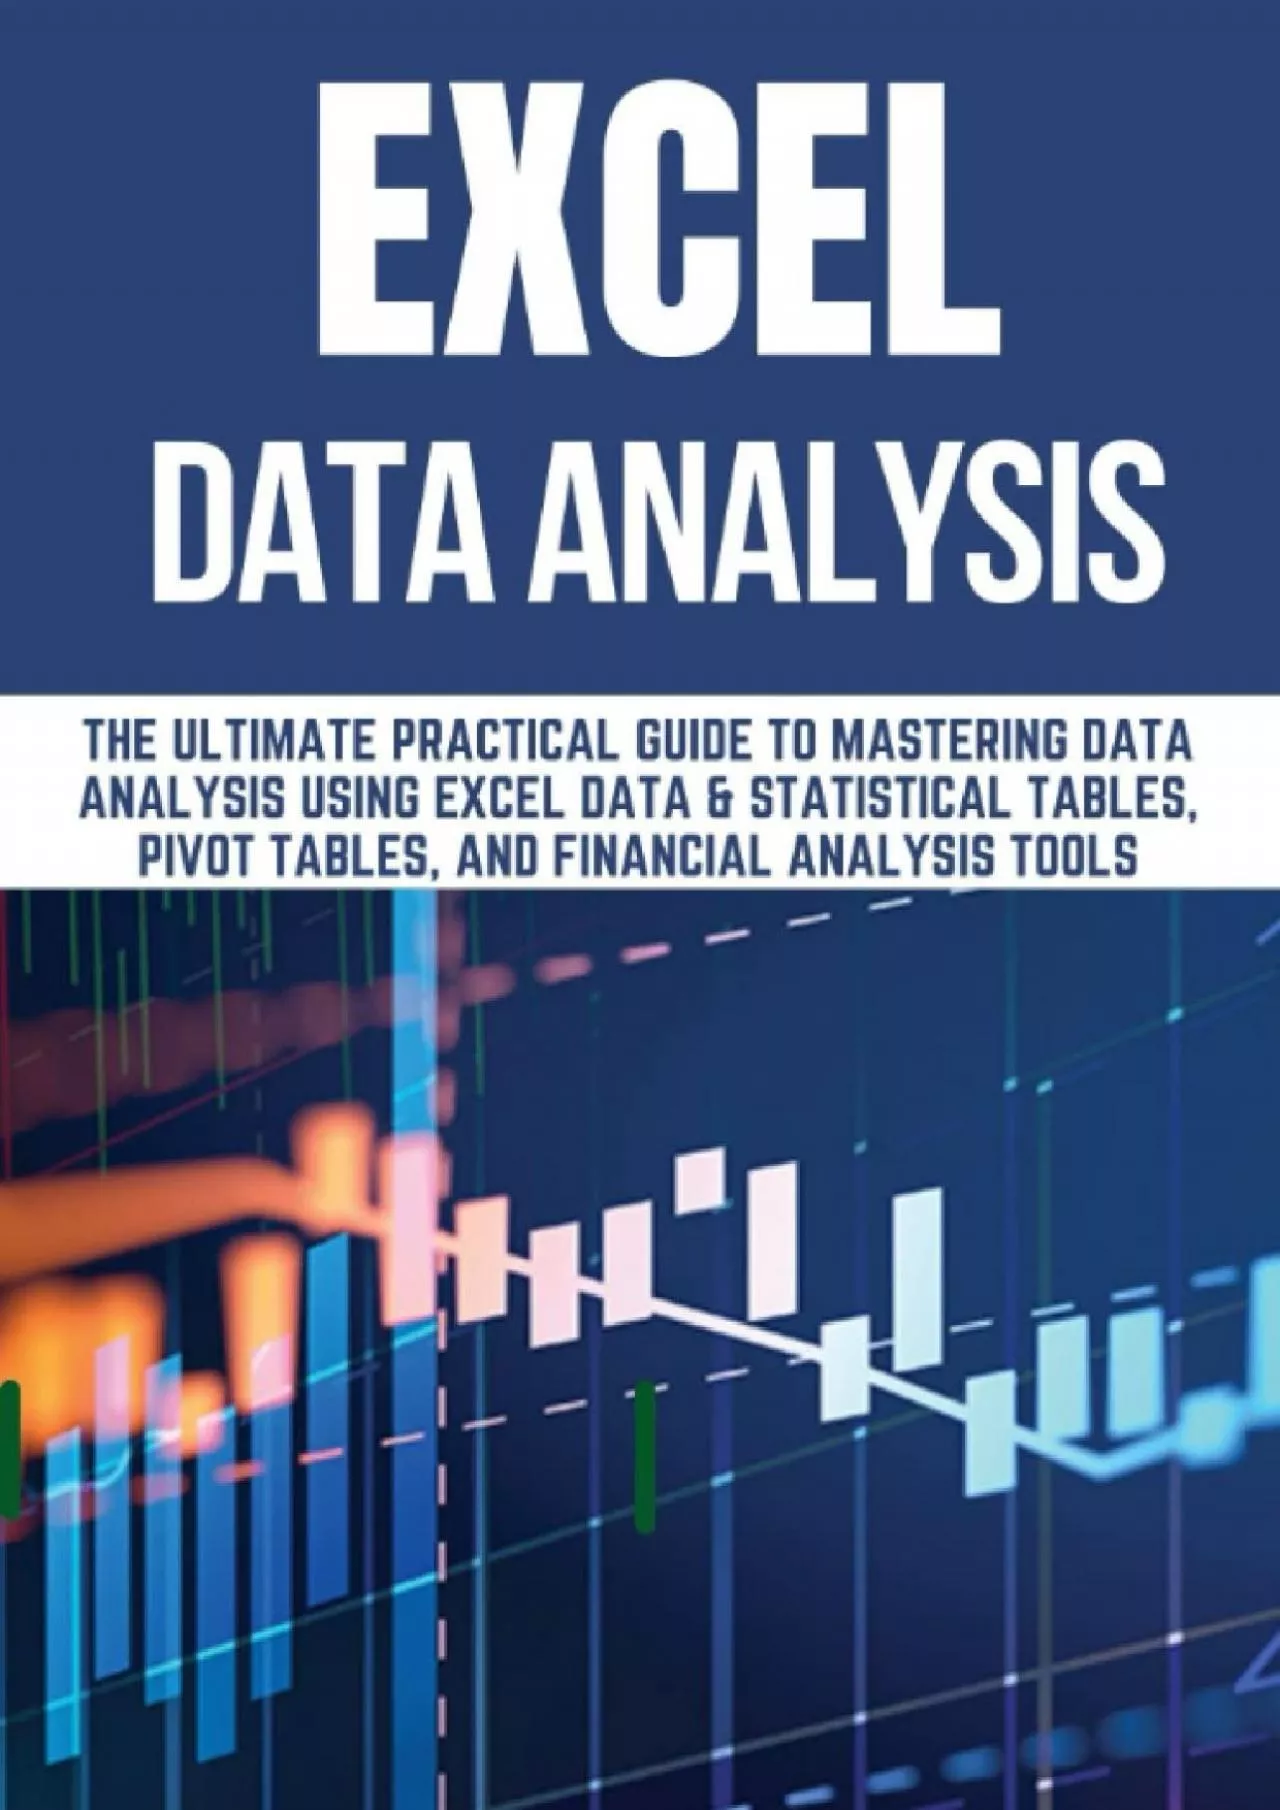 EXCEL DATA ANALYSIS: THE ULTIMATE PRACTICAL GUIDE TO MASTERING DATA ANALYSIS USING EXCEL